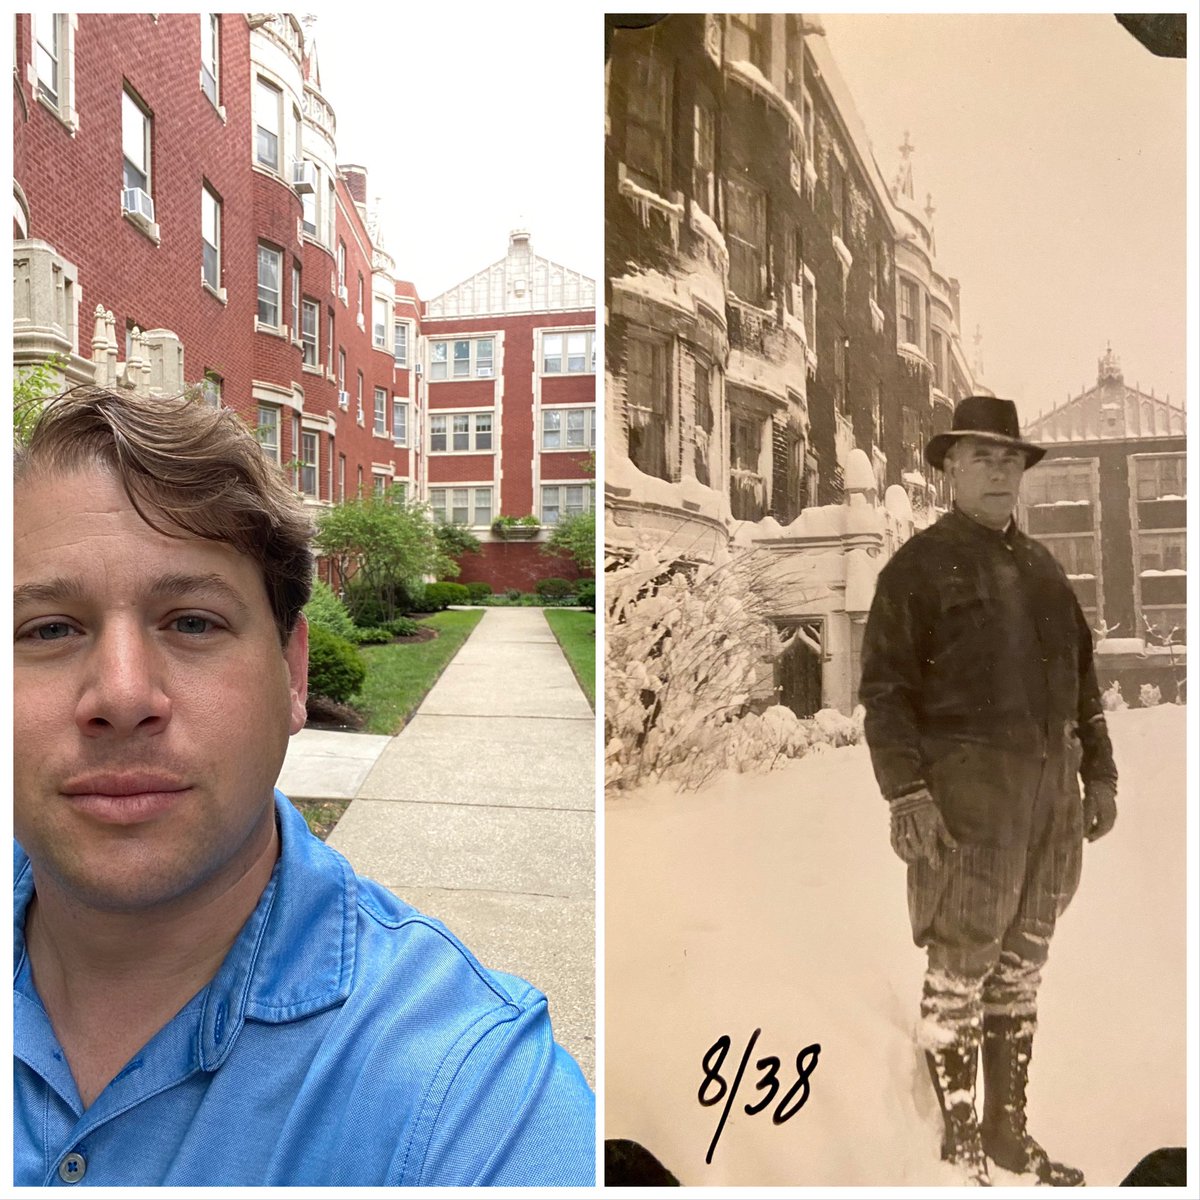 When my grandmother died a decade ago I was cleaning out her attic when I found an old photo album in the corner. I found myself in one of the spots that appeared in the album (Oak Park) last week and took a photo. My great grandfather is at right in 1938.